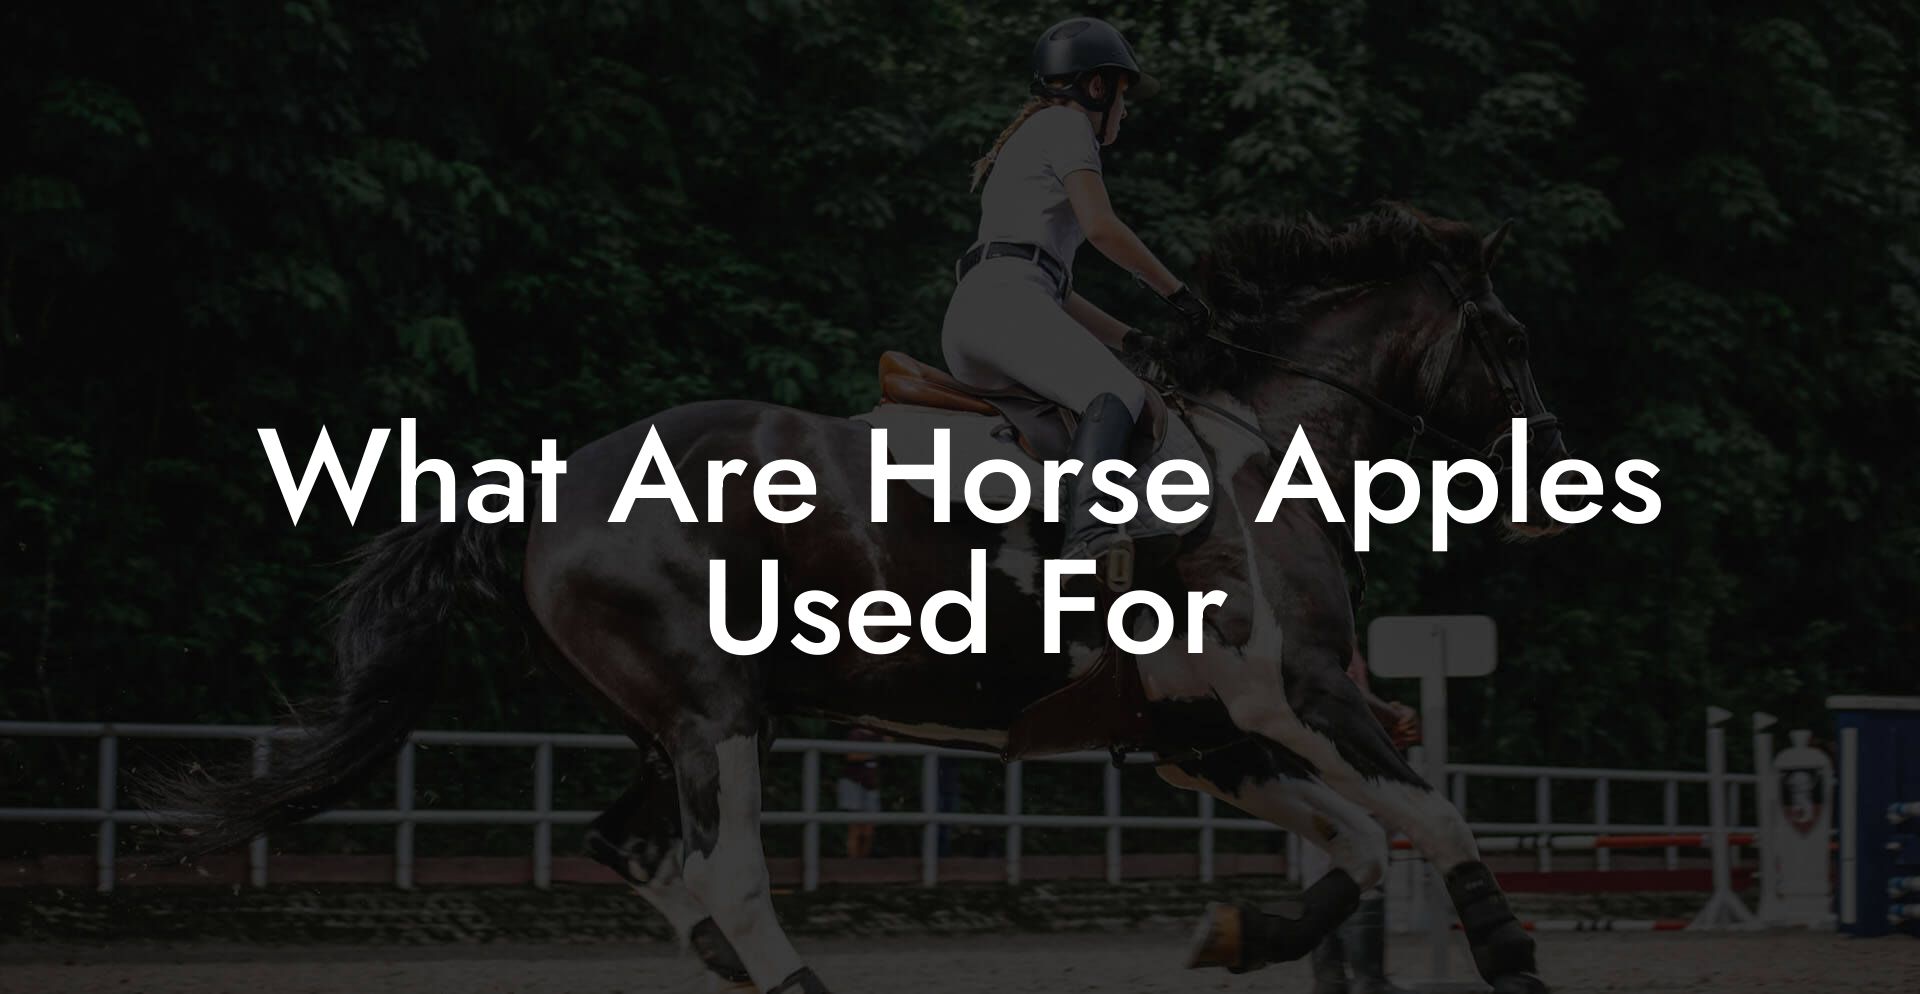 What Are Horse Apples Used For